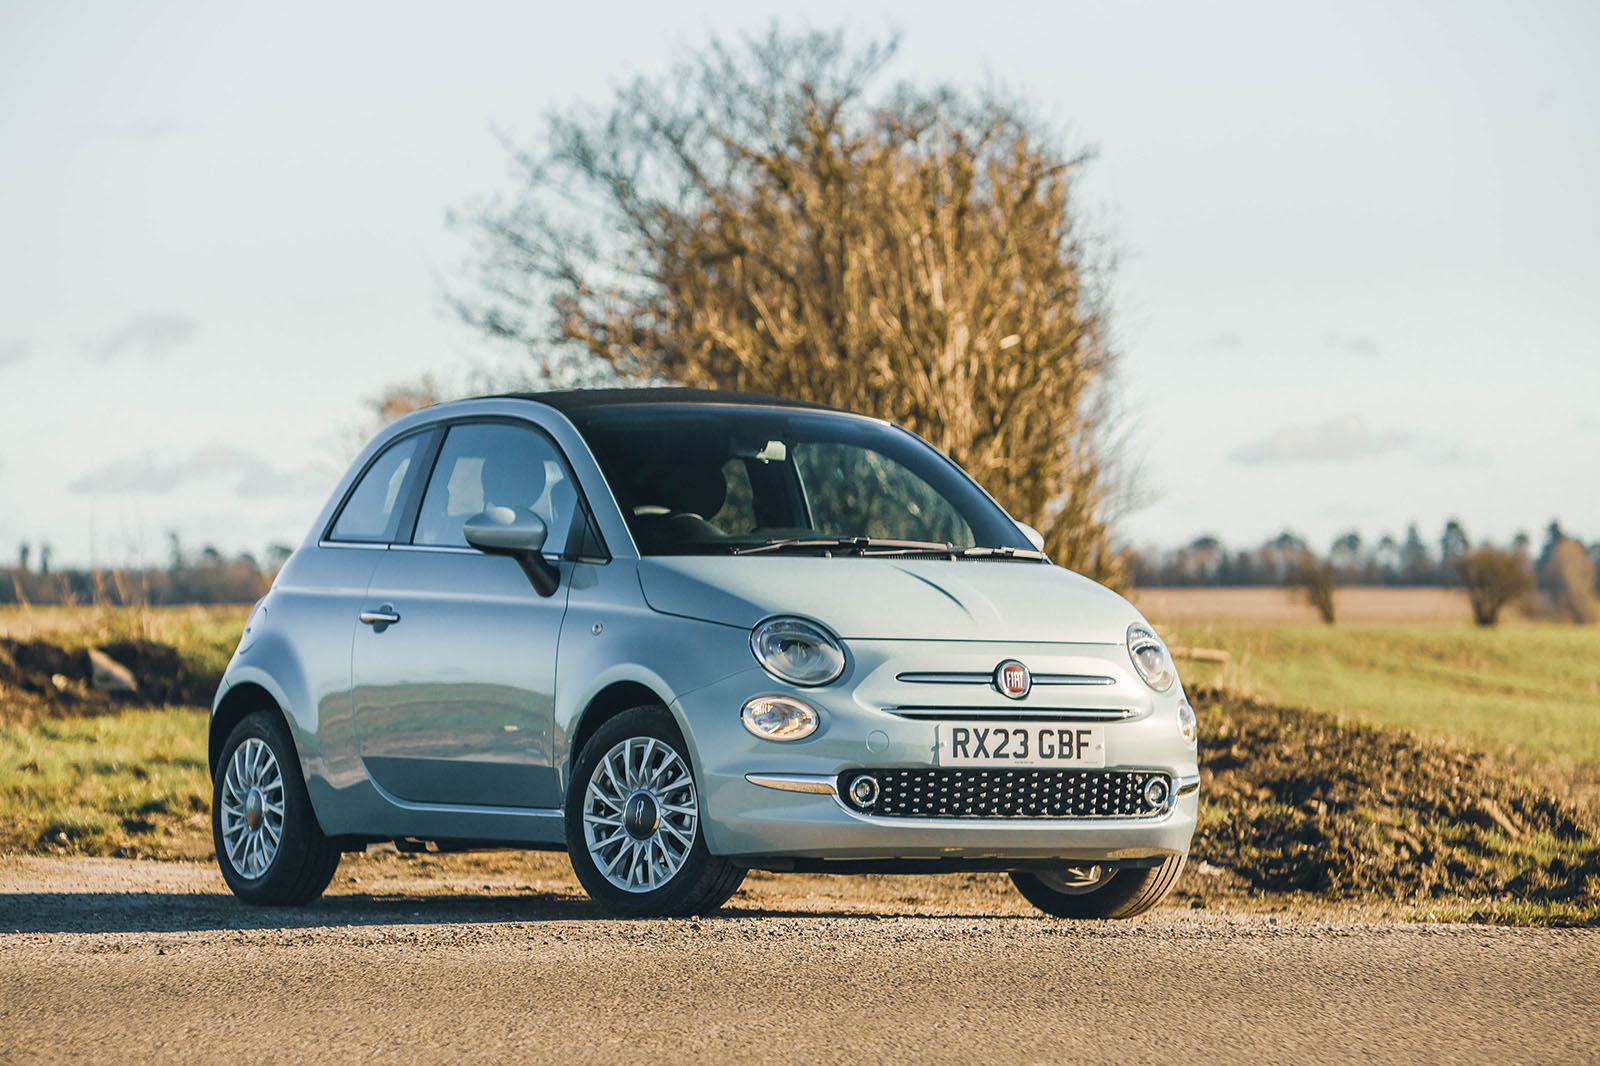 The Fiat 500 is dead — long live the Fiat 500